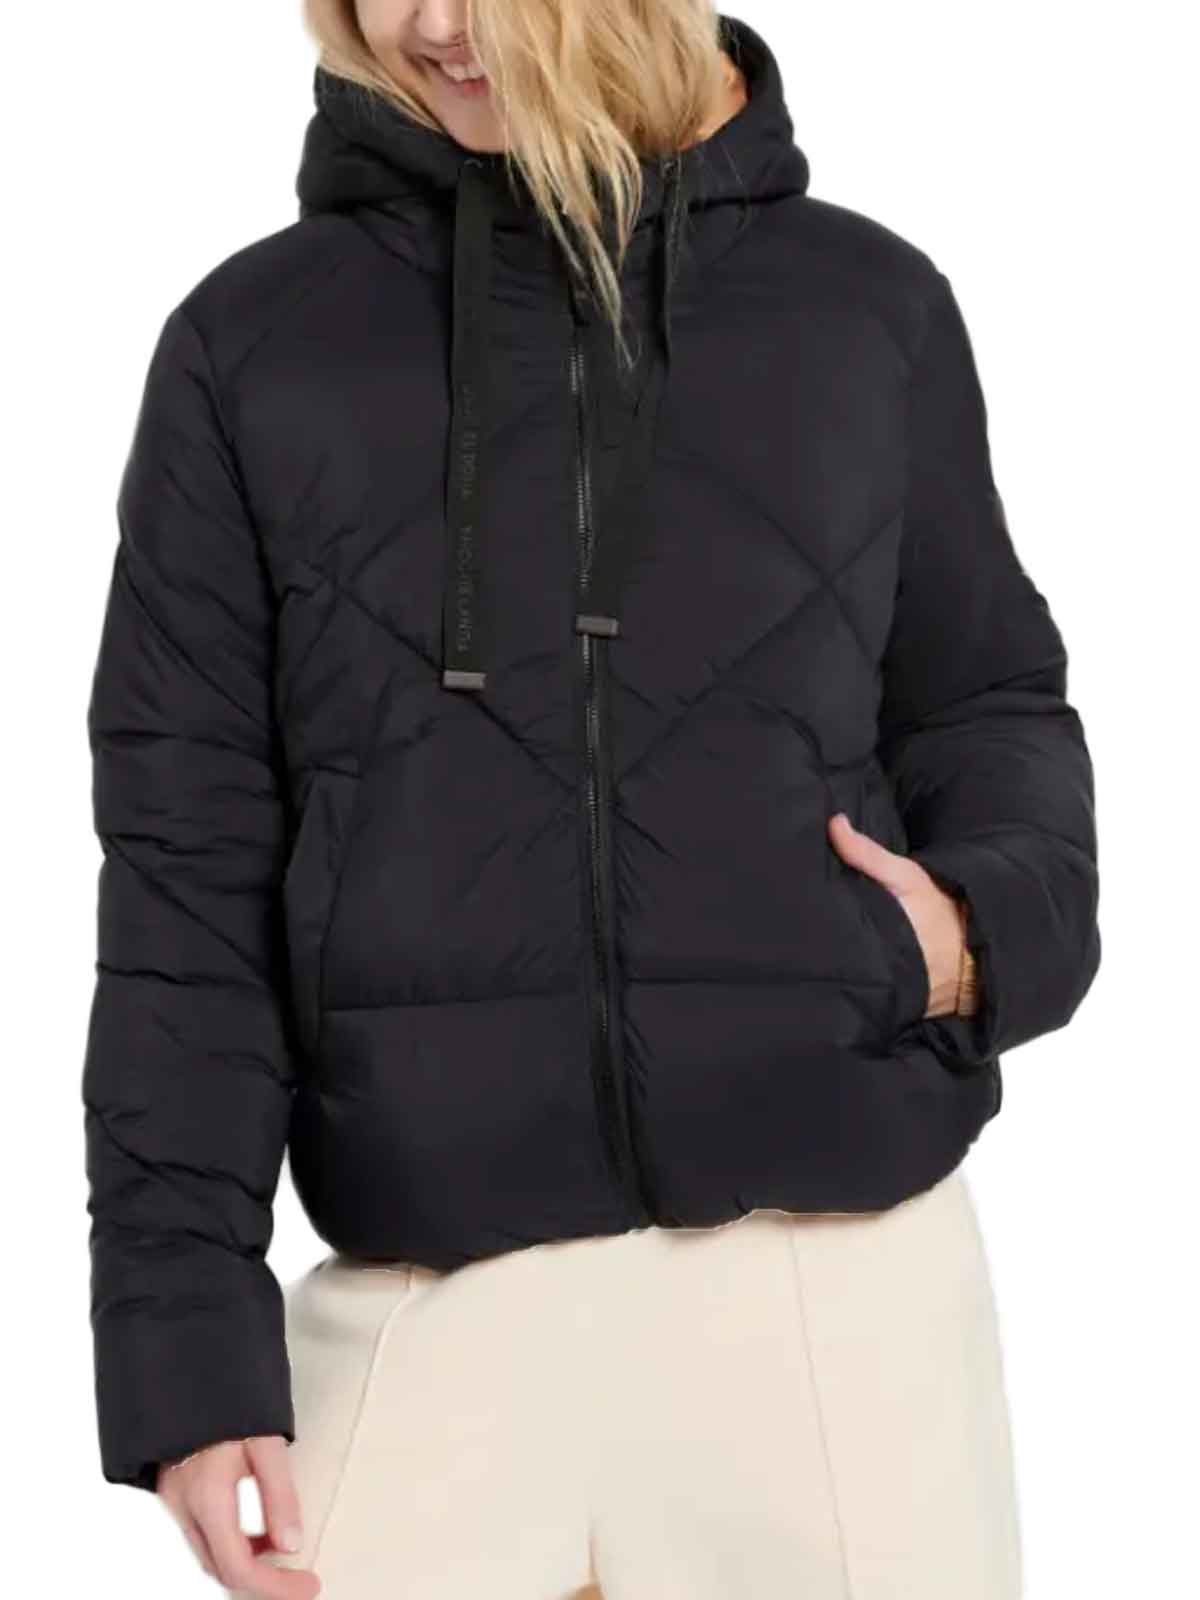   Funky Buddha | Relaxed fit puffer  |  